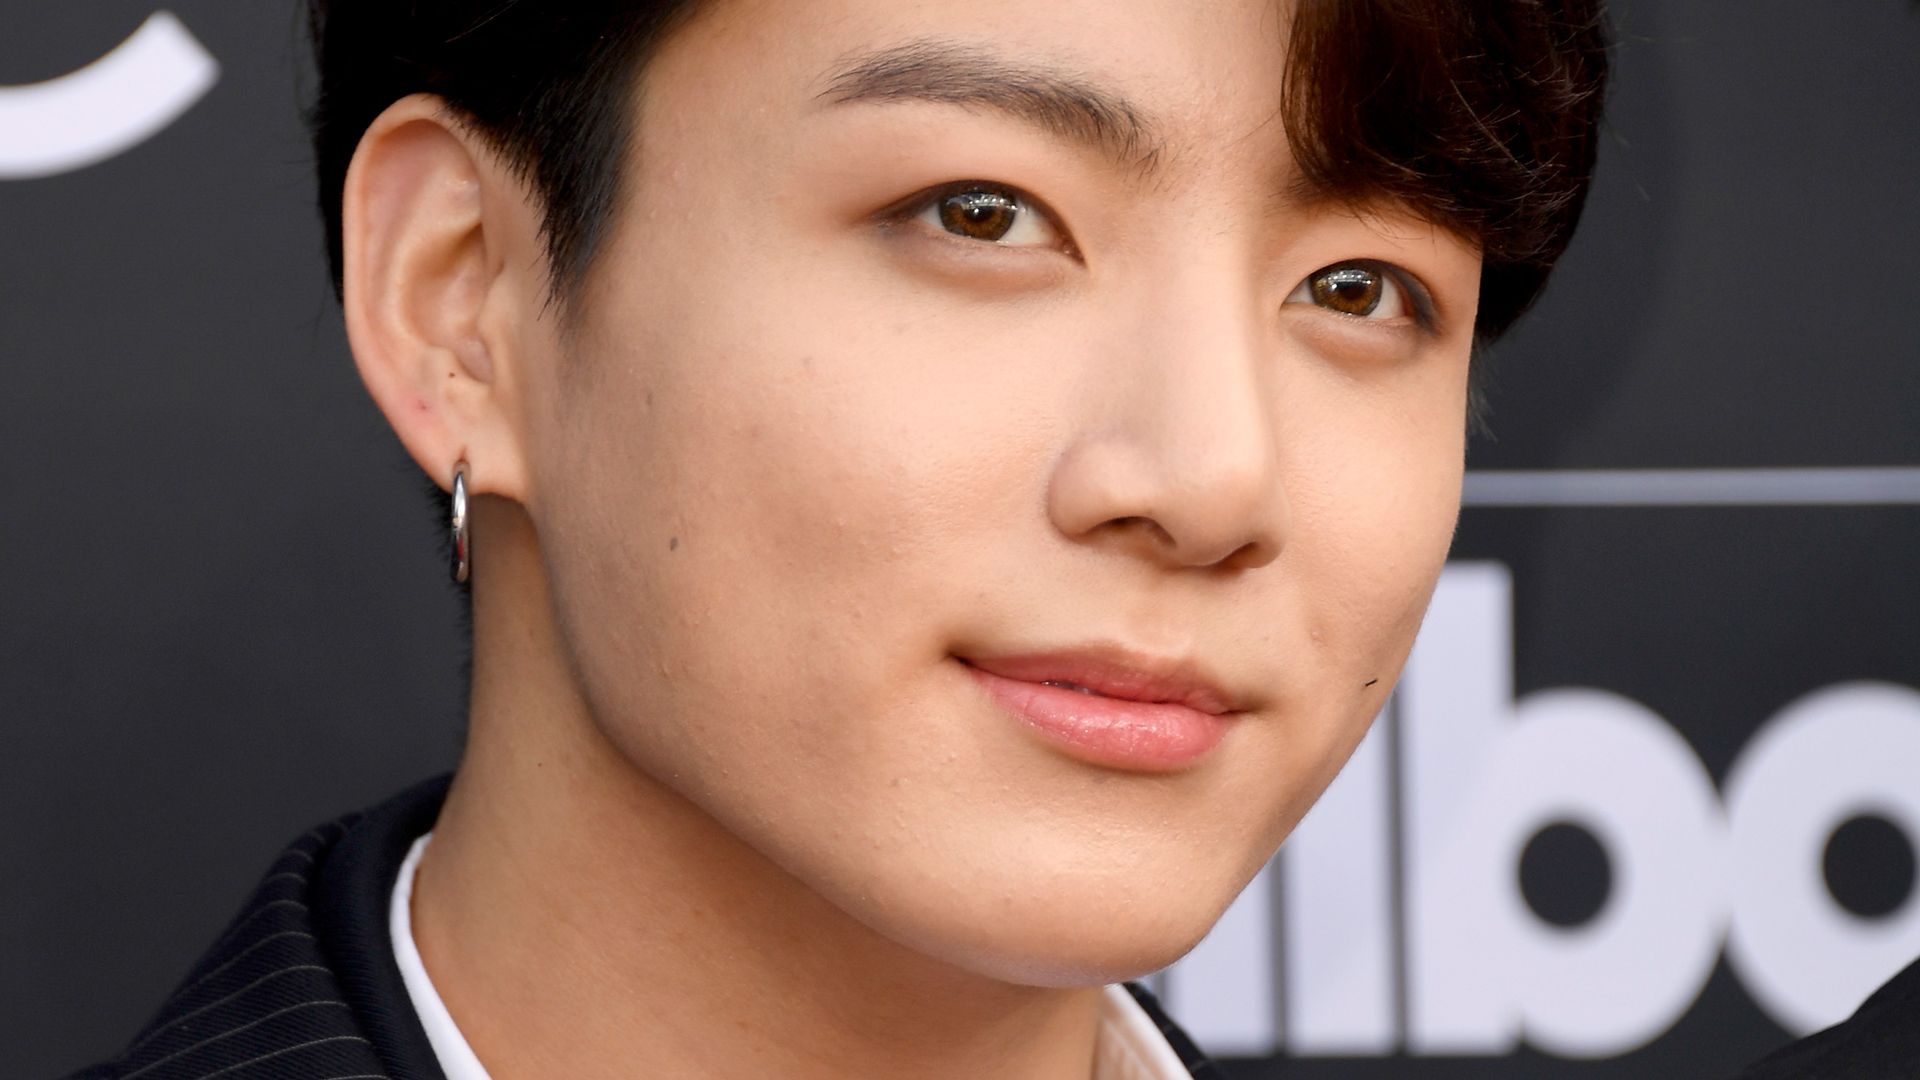 BTS: Jungkook Explains Why He Cut His Long Hair, But the Journey's